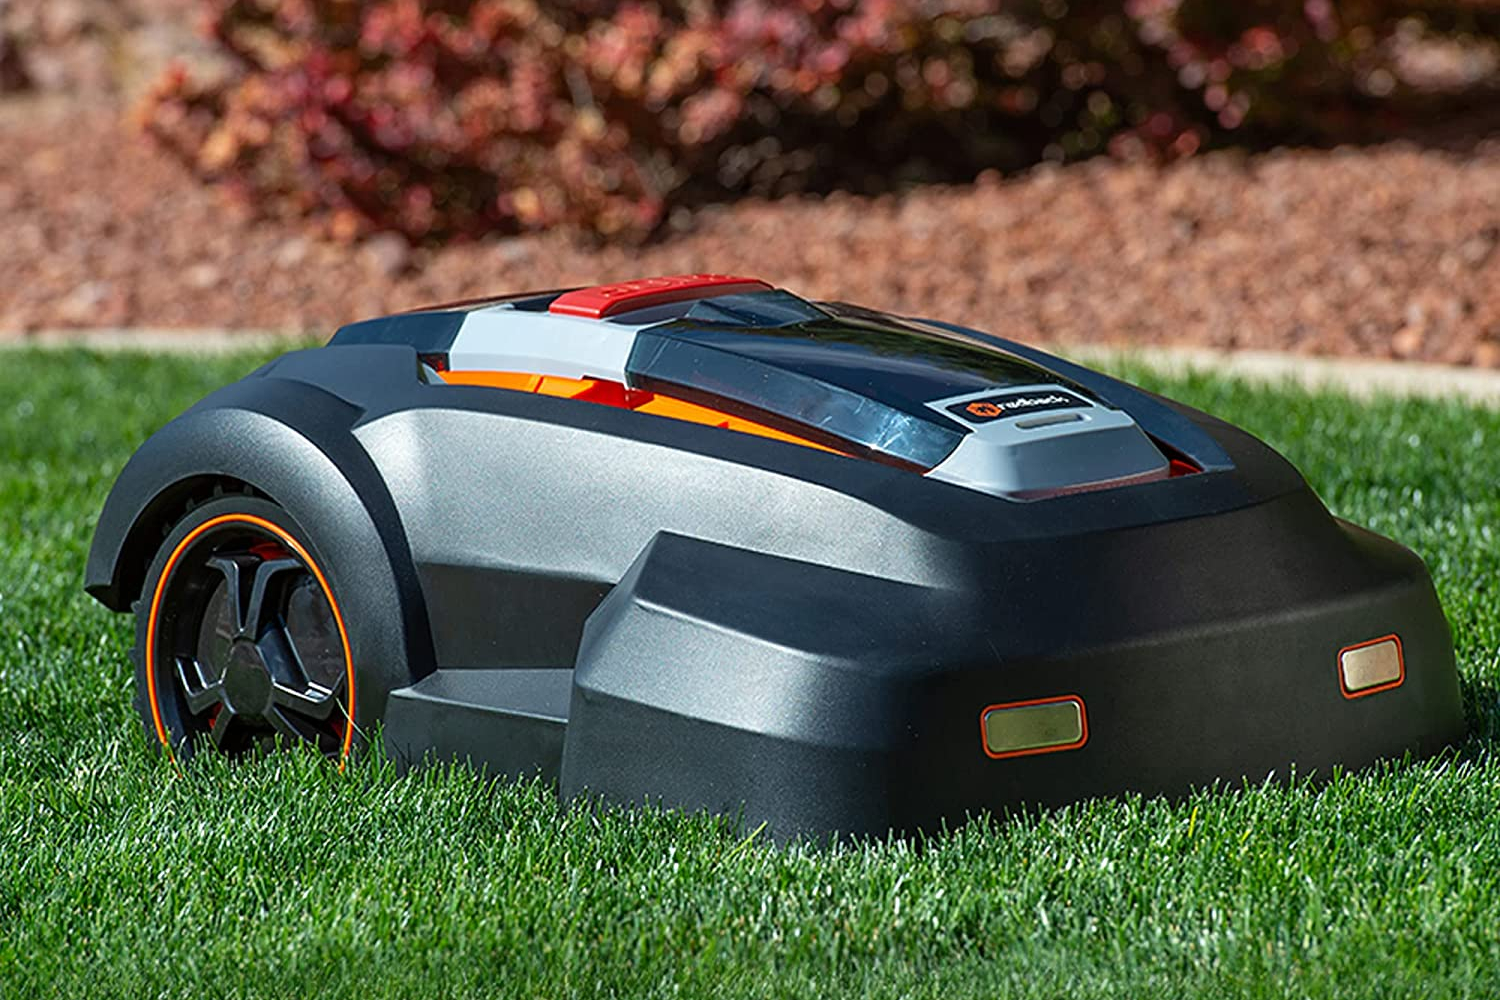 The best robot lawn mower models for 2023 | Trends